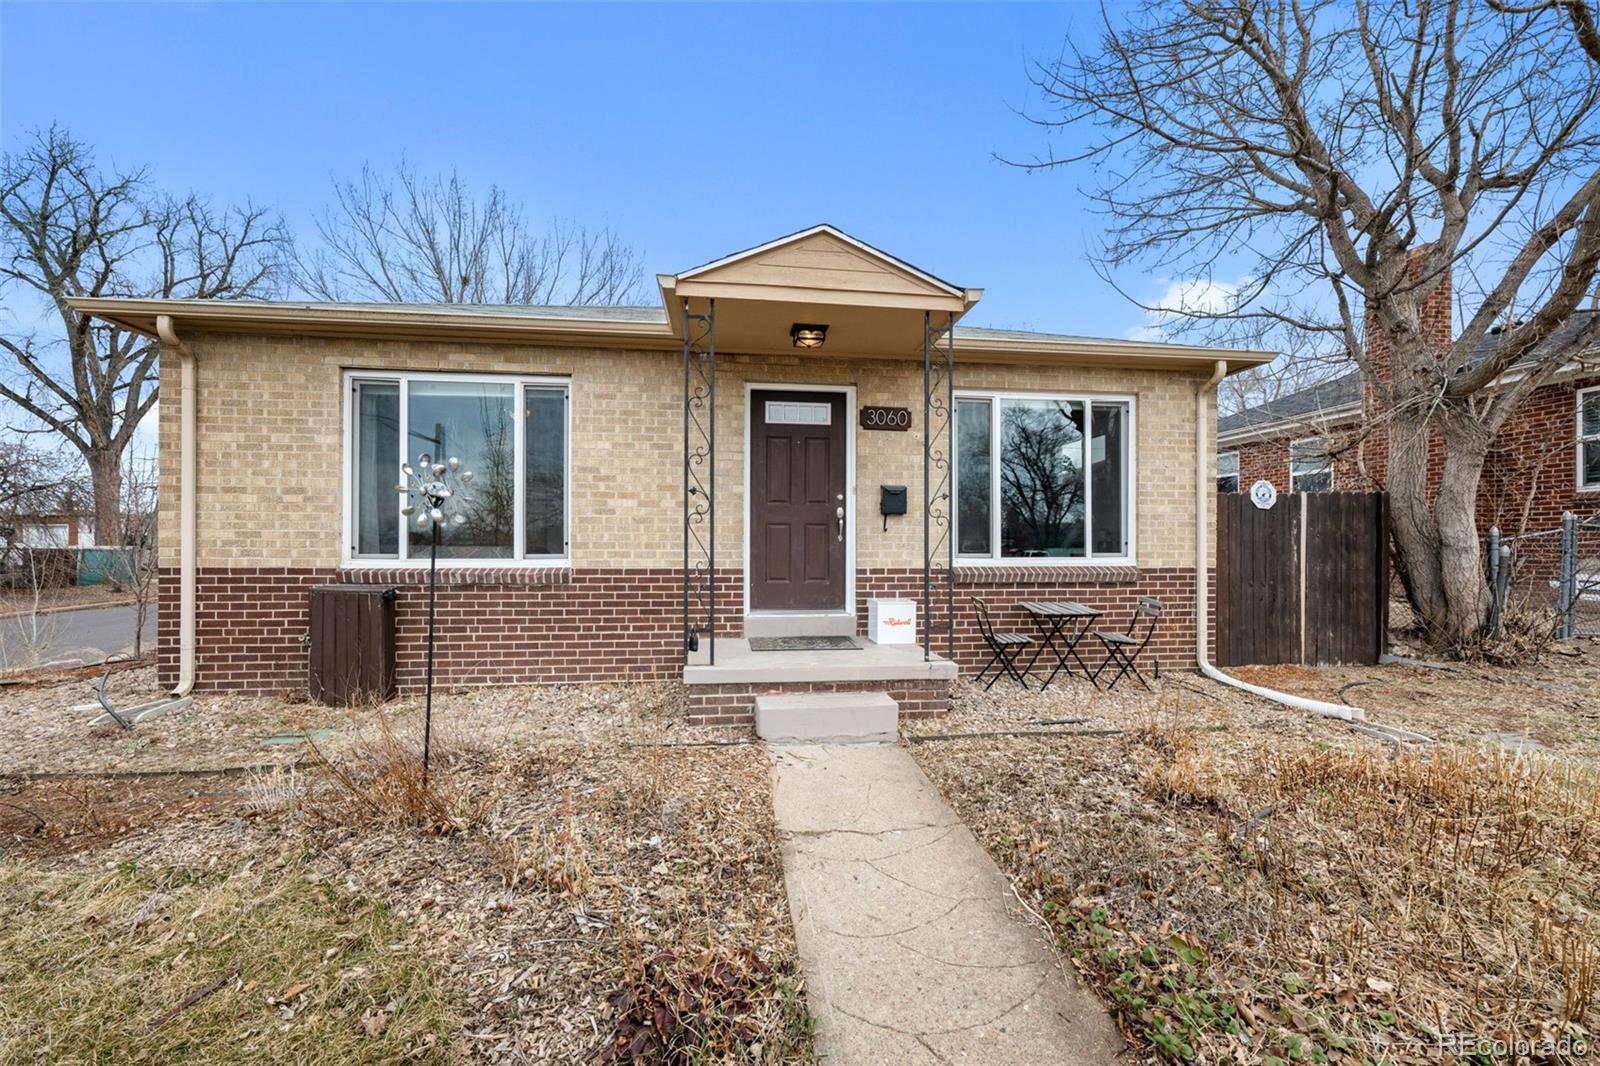 3060 n clayton street, denver sold home. Closed on 2024-04-29 for $611,062.